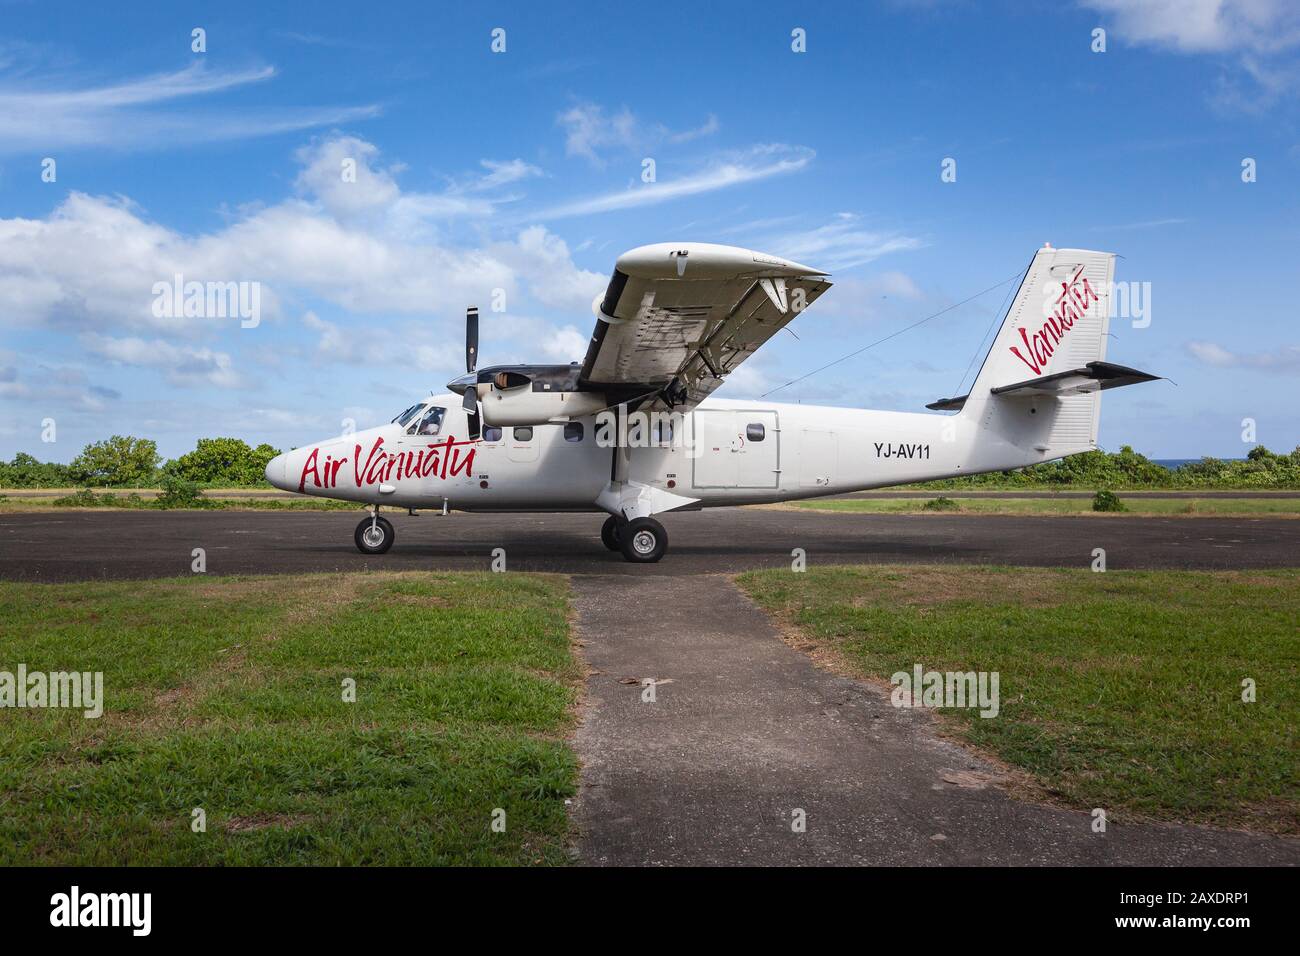 Pentecost island, South Pacific Oceania Airplane local airlines on the airstrip Air Vanuatu Stock Photo